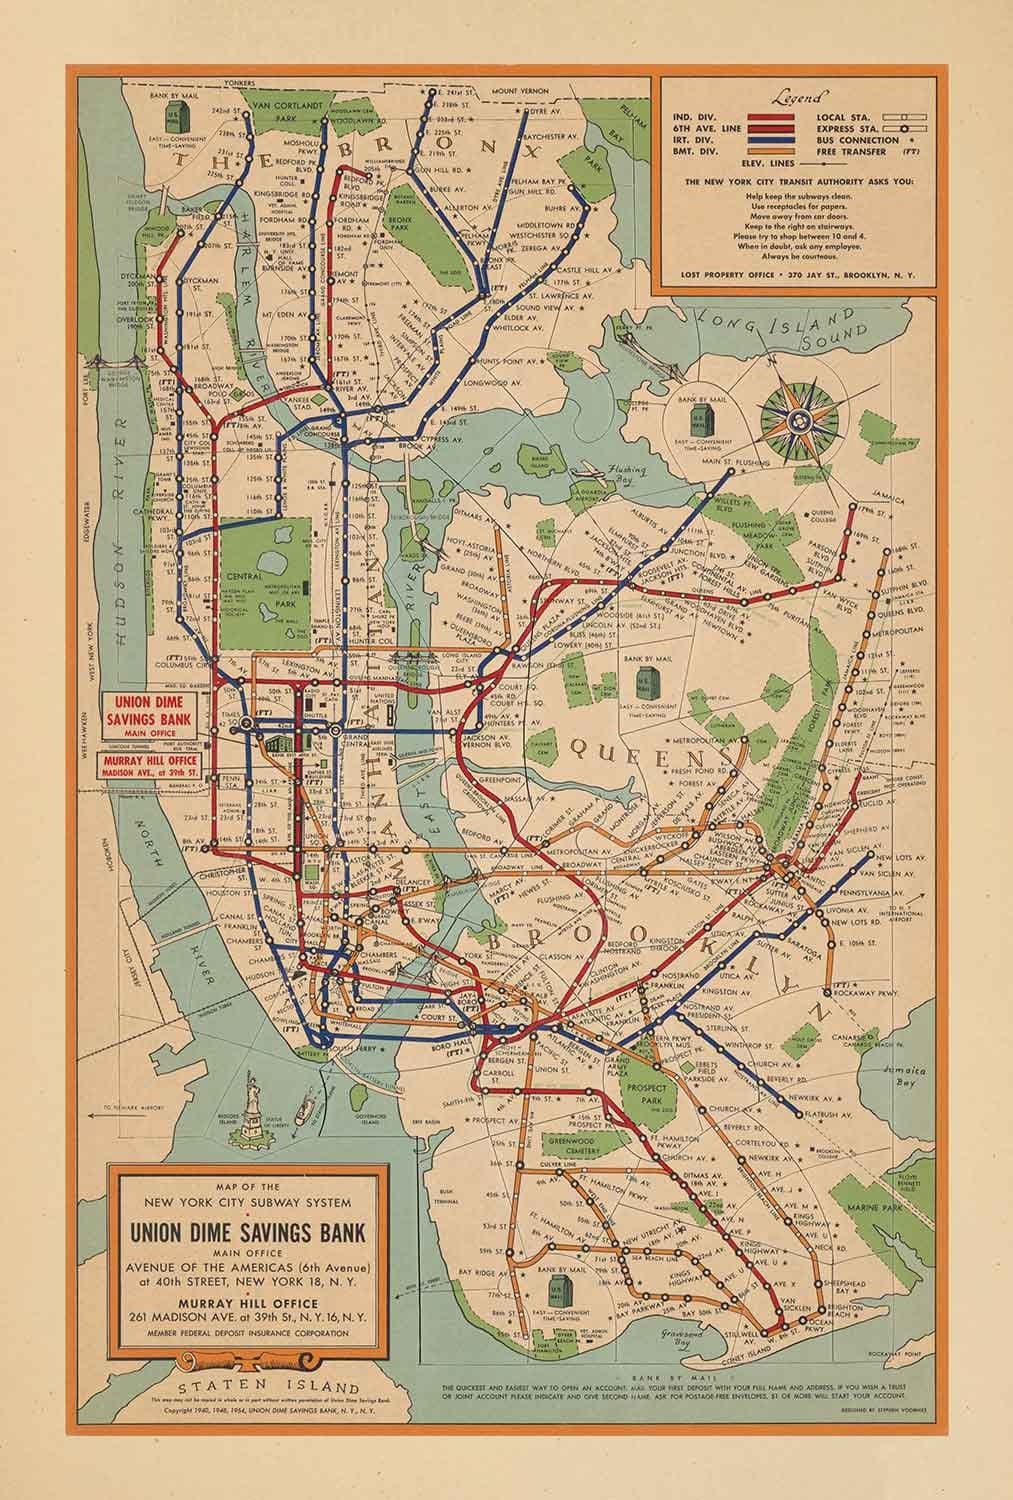 Old Subway Map of New York City, 1954 by Voorhies - Queens, Brooklyn, Manhattan, IND, IRT, BMT Rail Lines